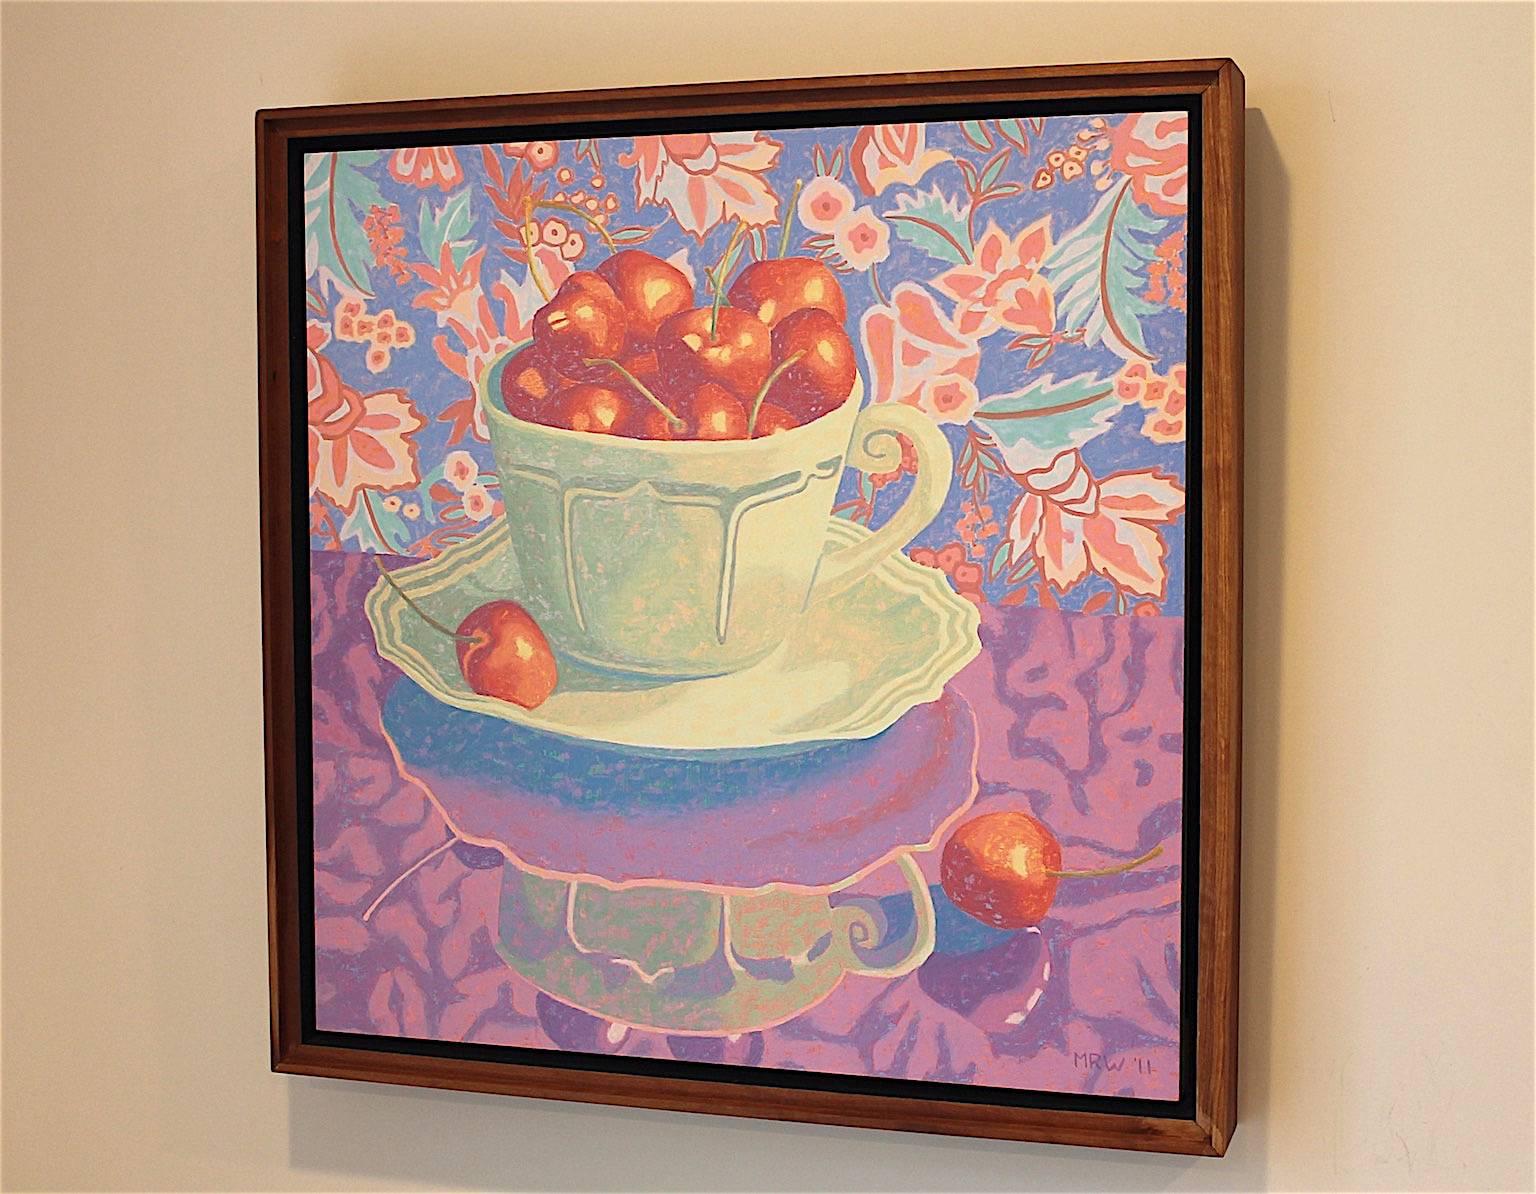 Green Cup With Cherries - Purple Still-Life Painting by Marcia Wise